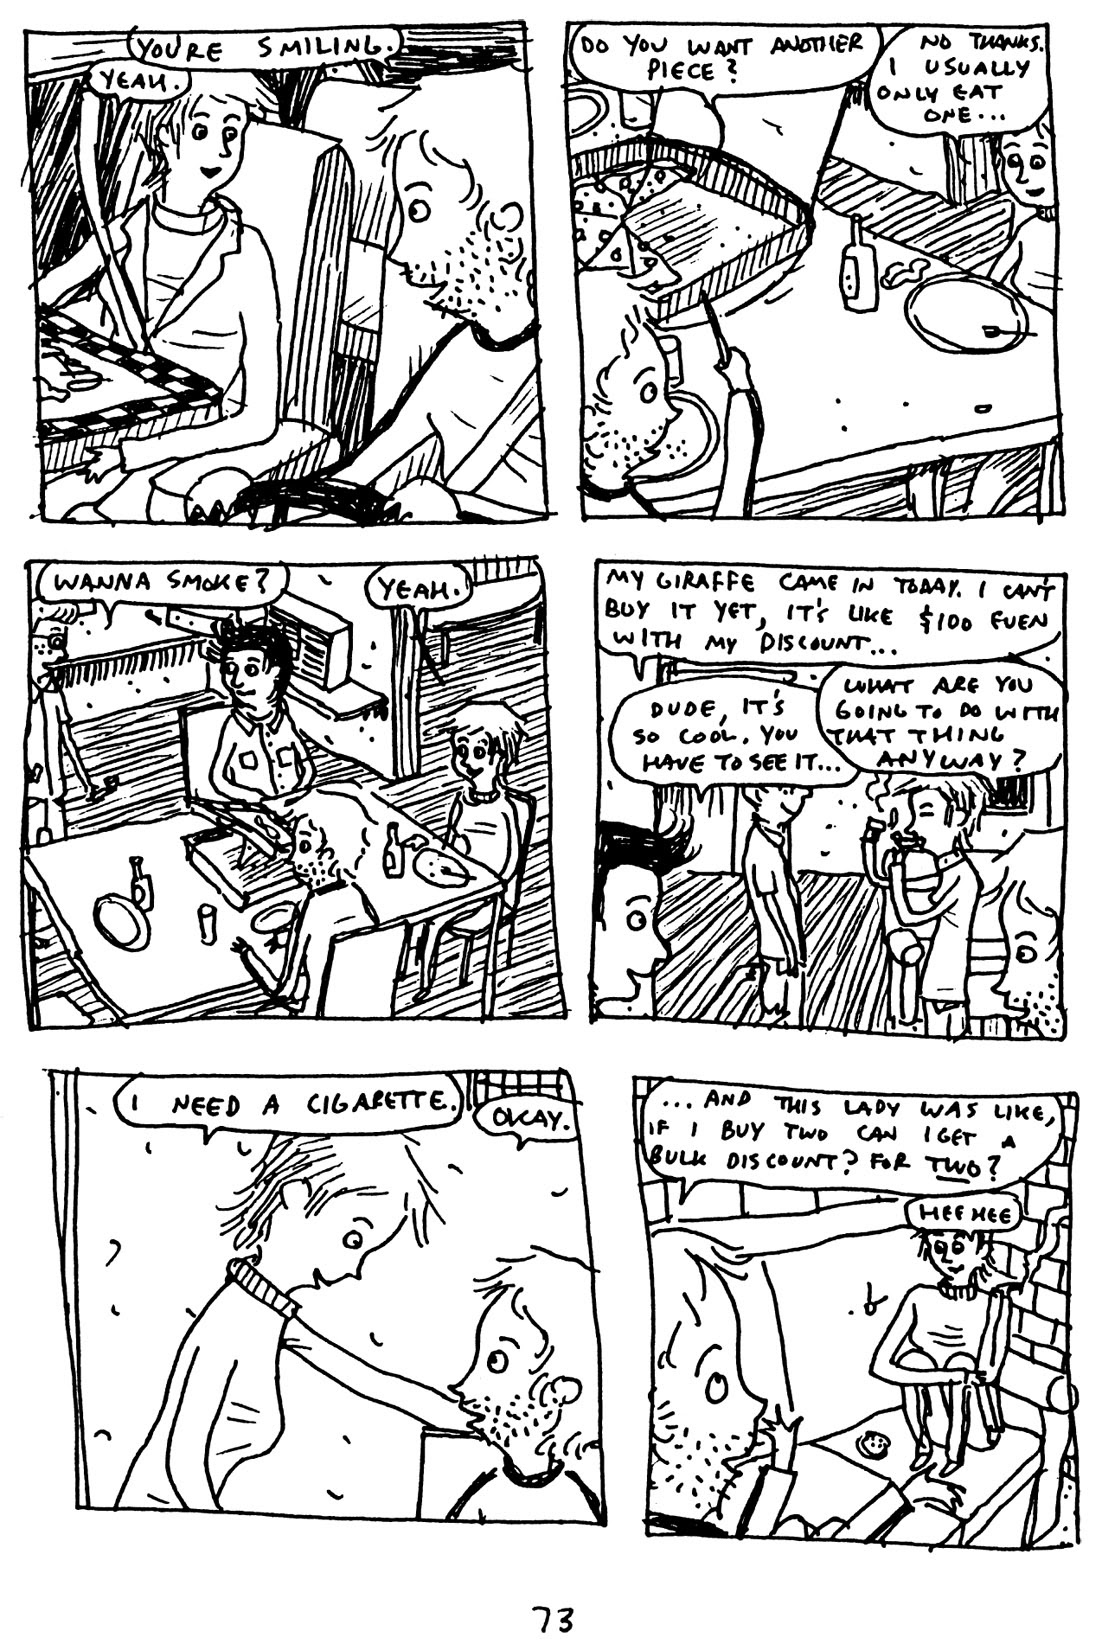 Read online Unlikely comic -  Issue # TPB (Part 1) - 84